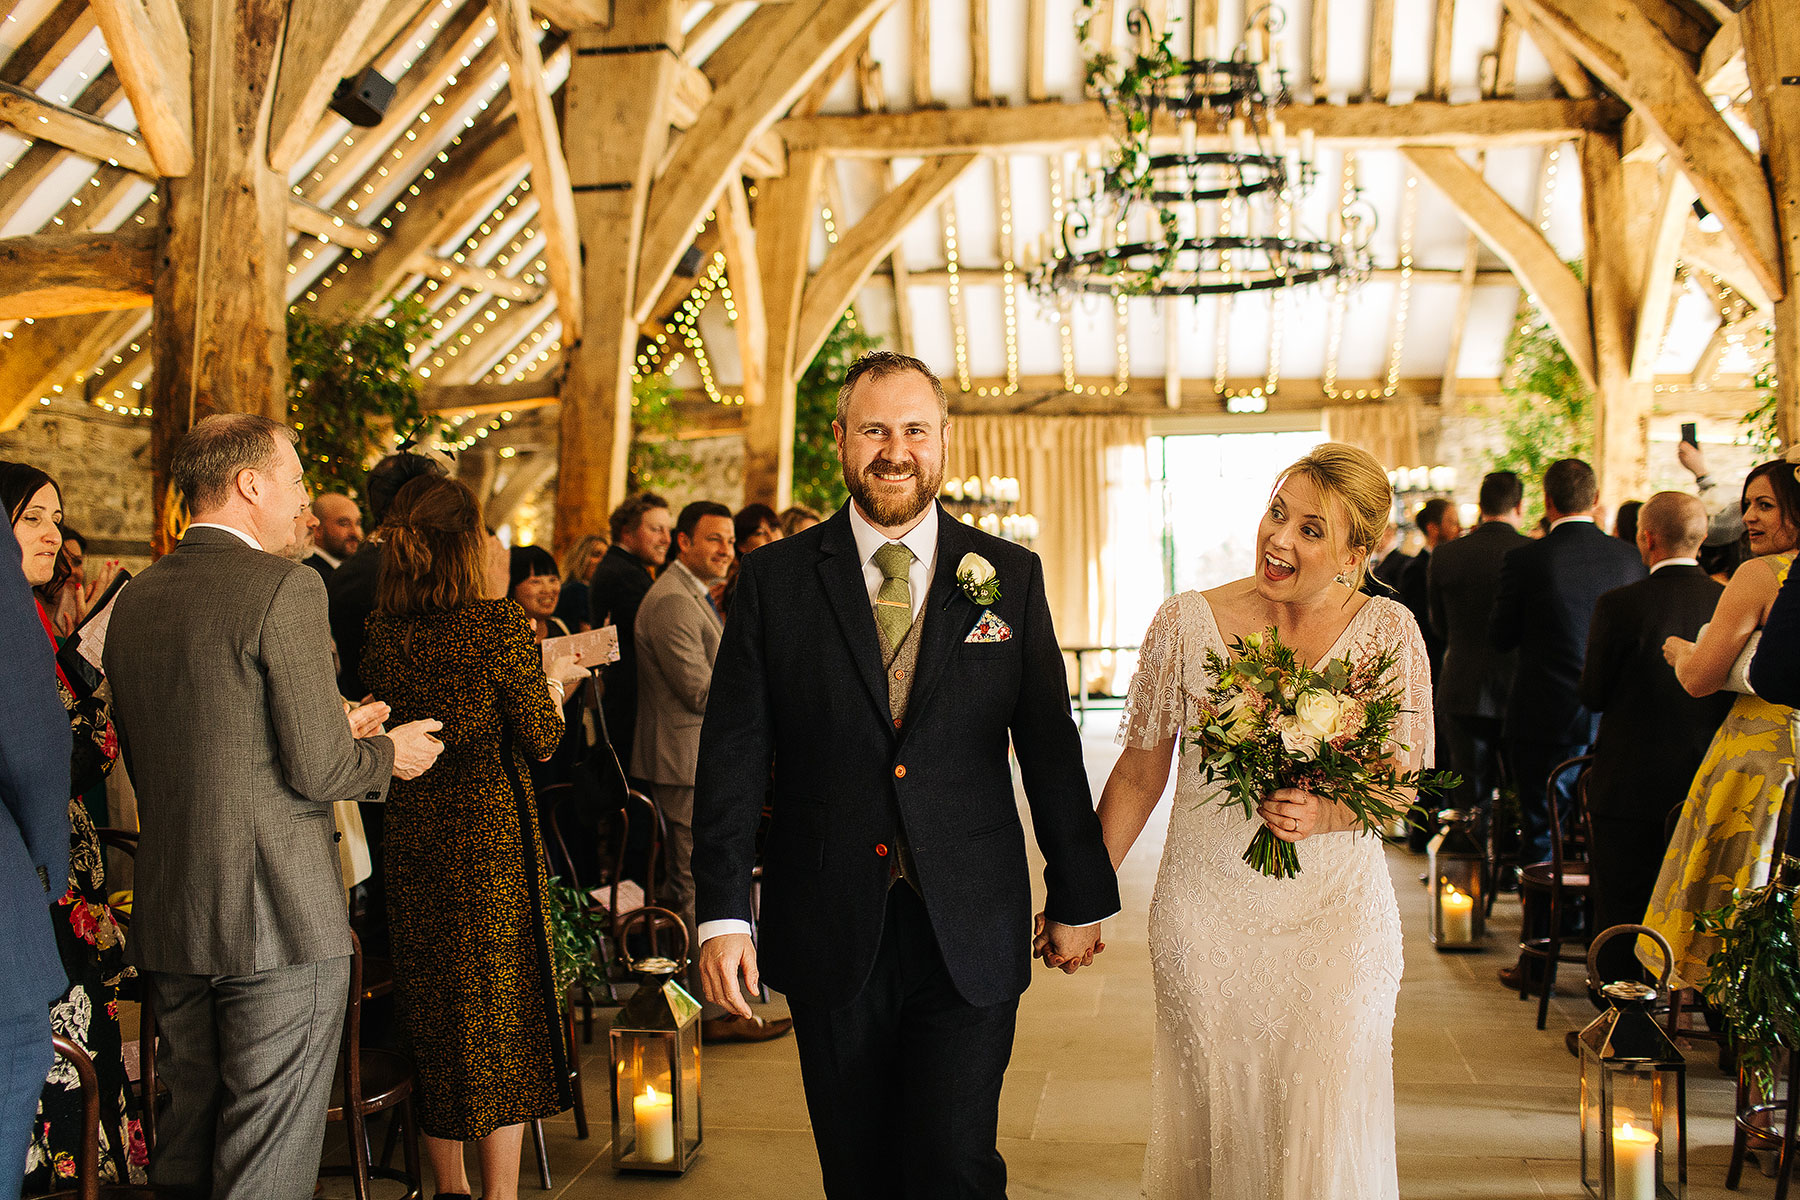 Bride and groom getting married in a Yorkshire Wedding Barn